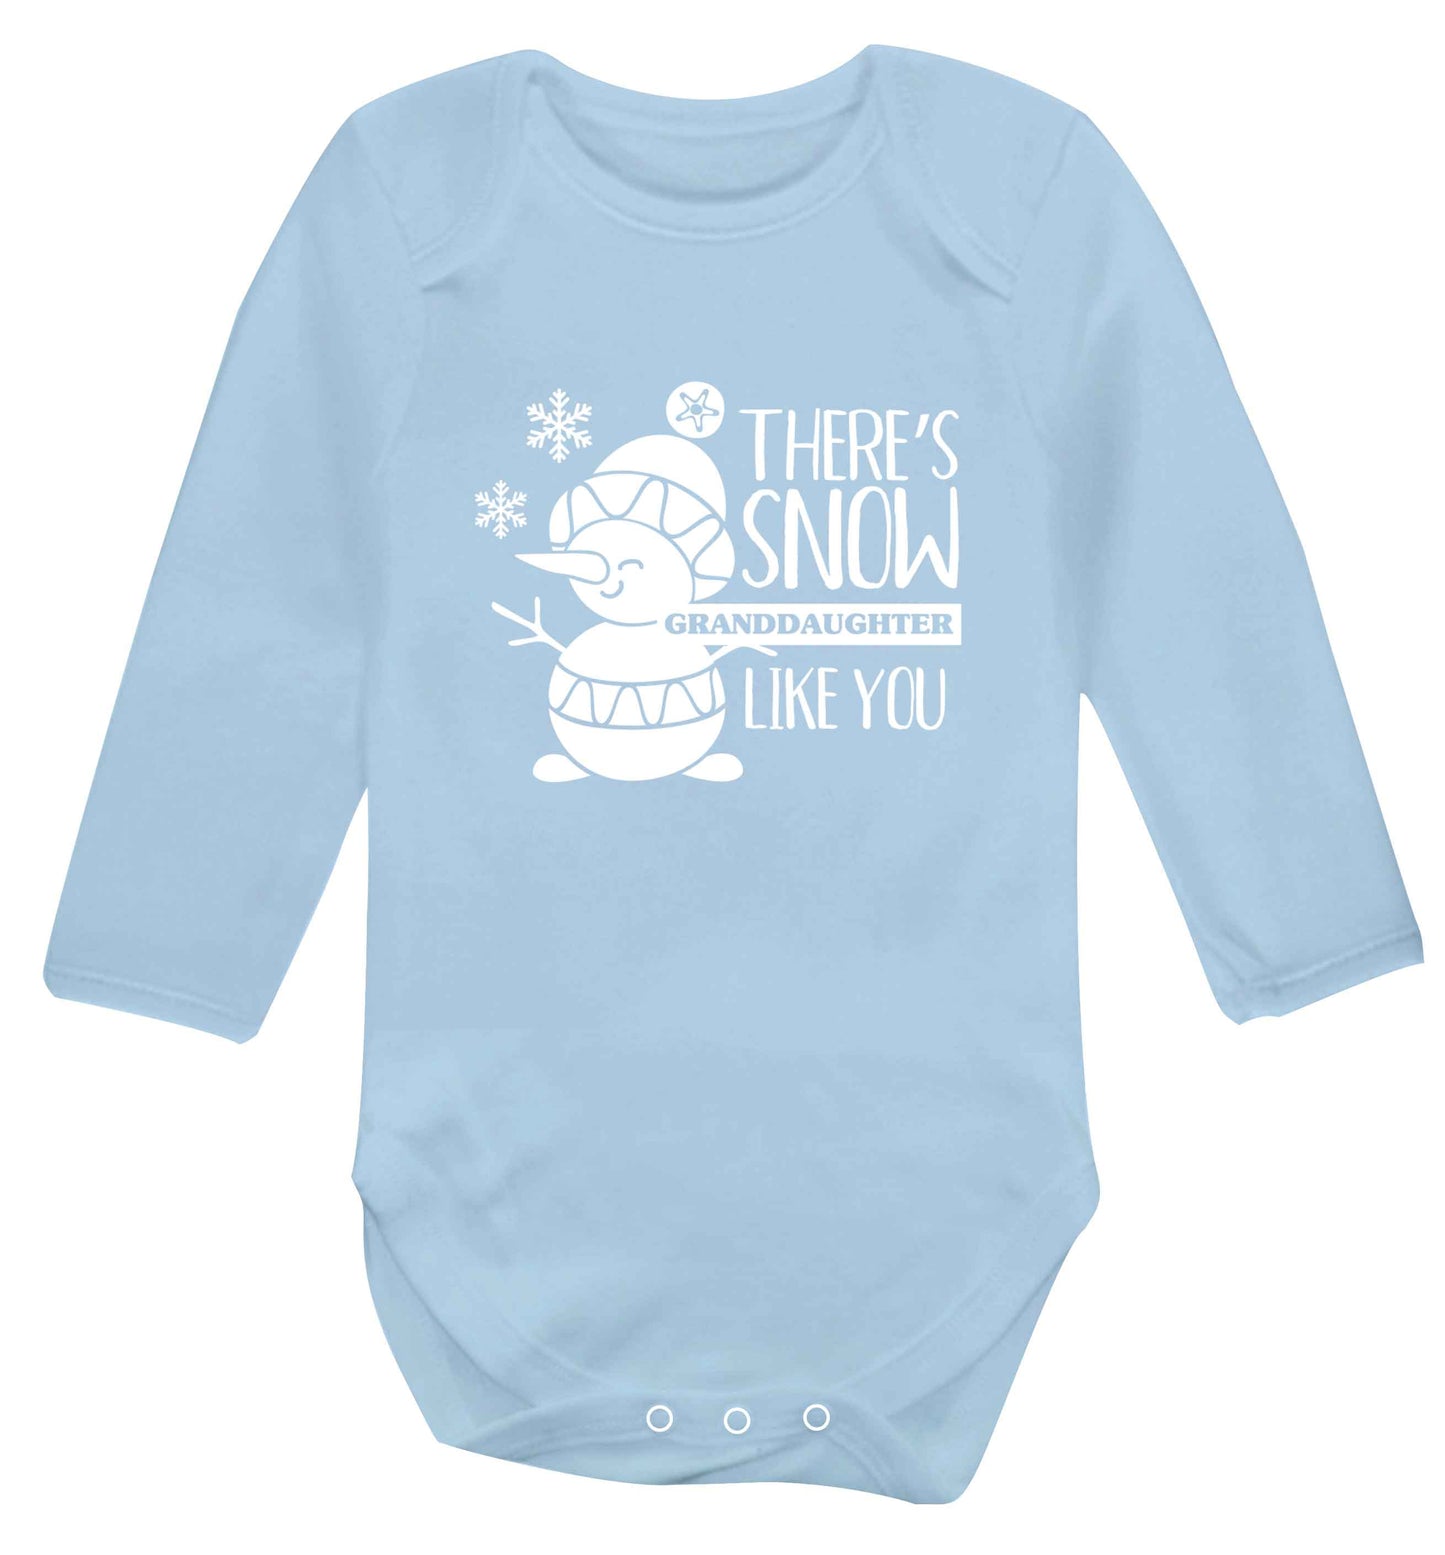 There's snow granddaughter like you baby vest long sleeved pale blue 6-12 months